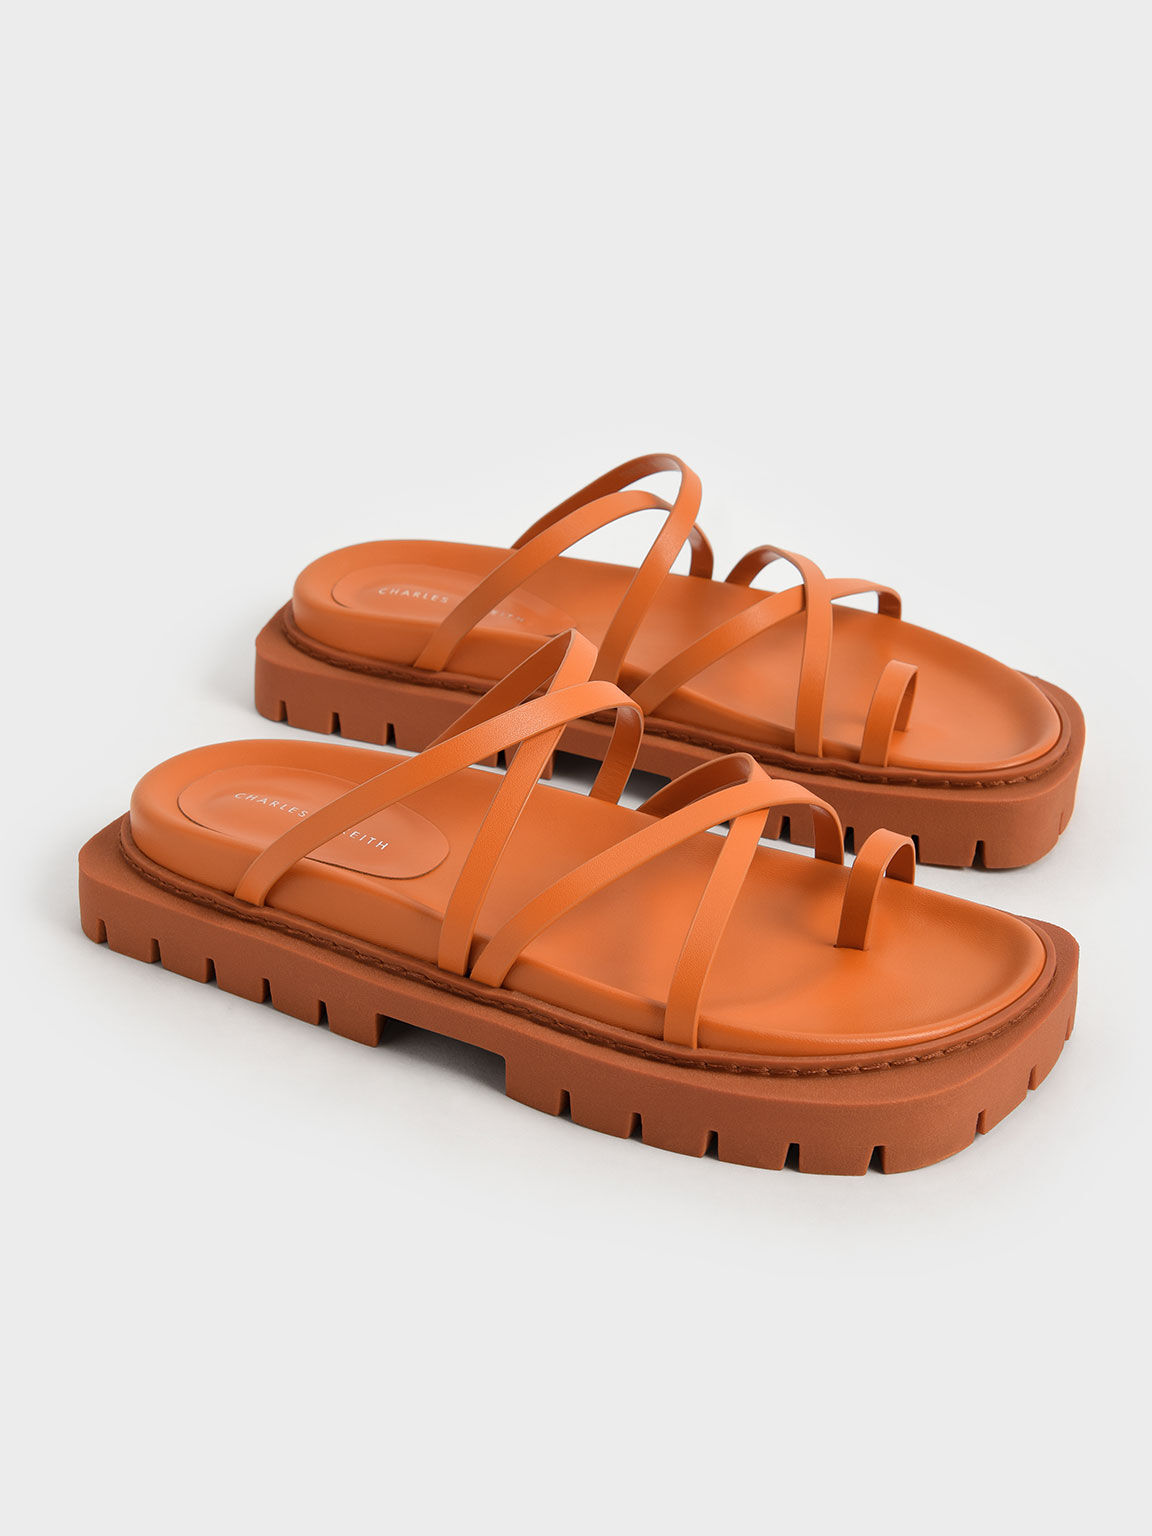 Strappy Cleated Sole Sandals, Orange, hi-res